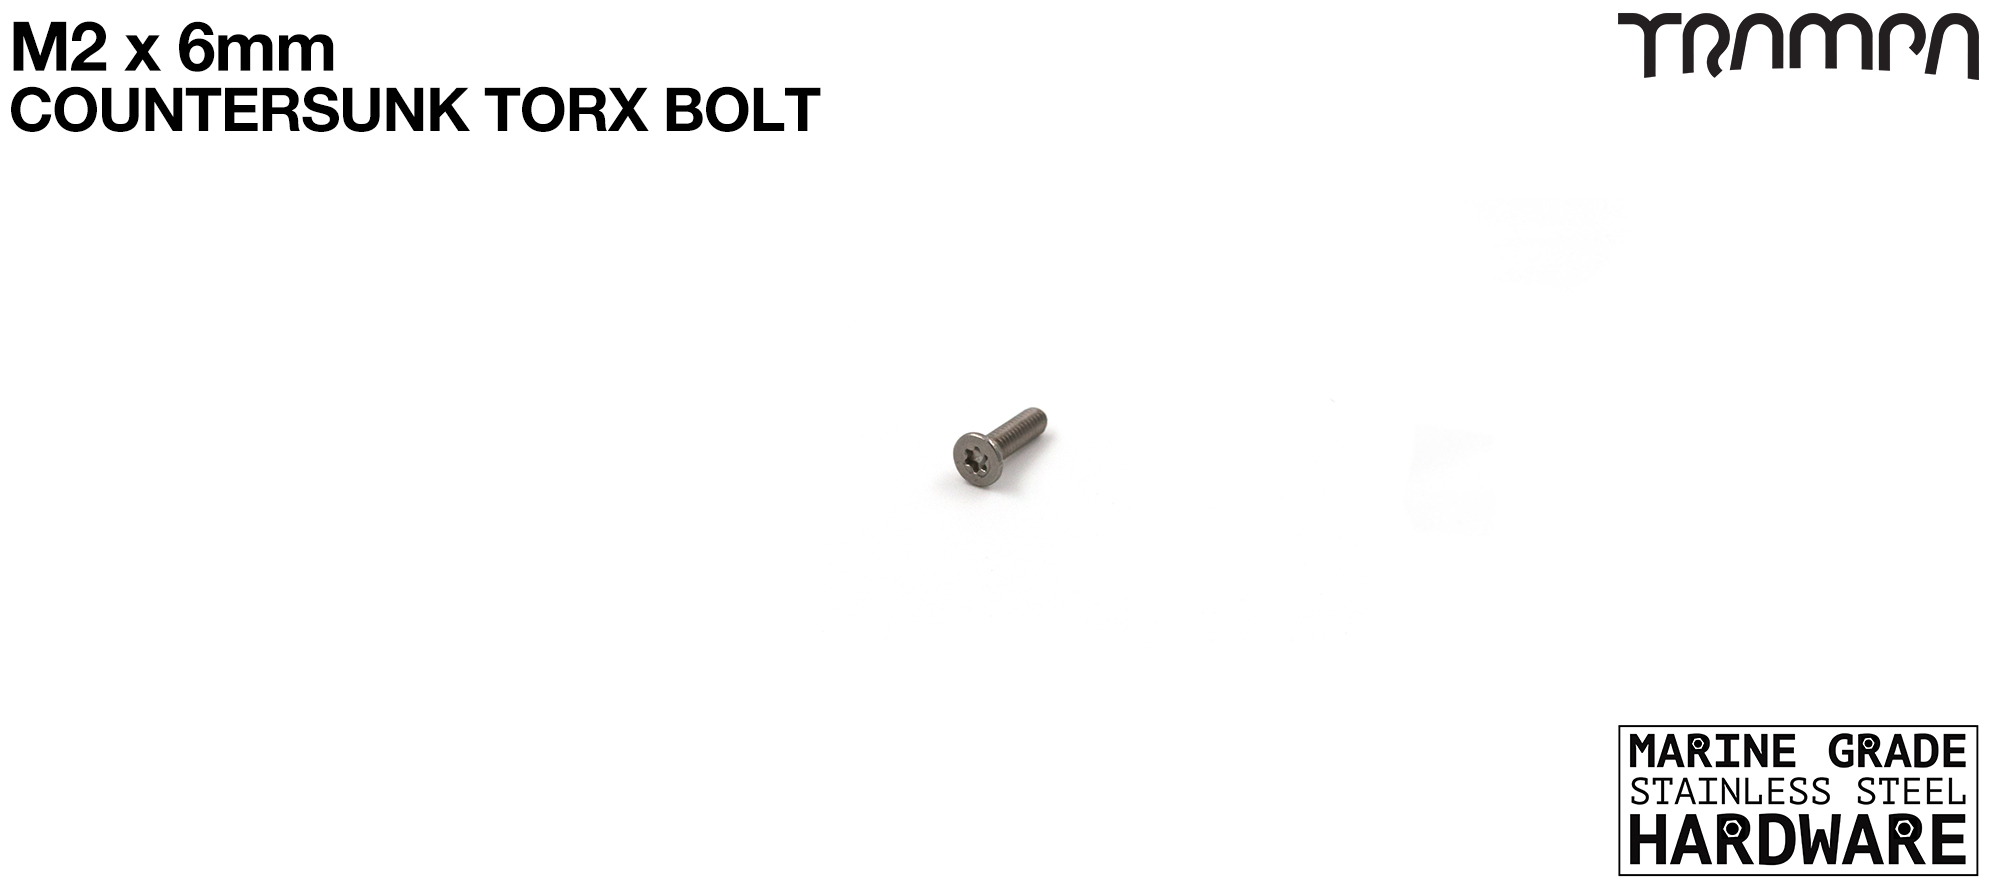 M2 x 6mm TORX Countersunk Bolt - Marine Grade Stainless steel with TORX Fitting